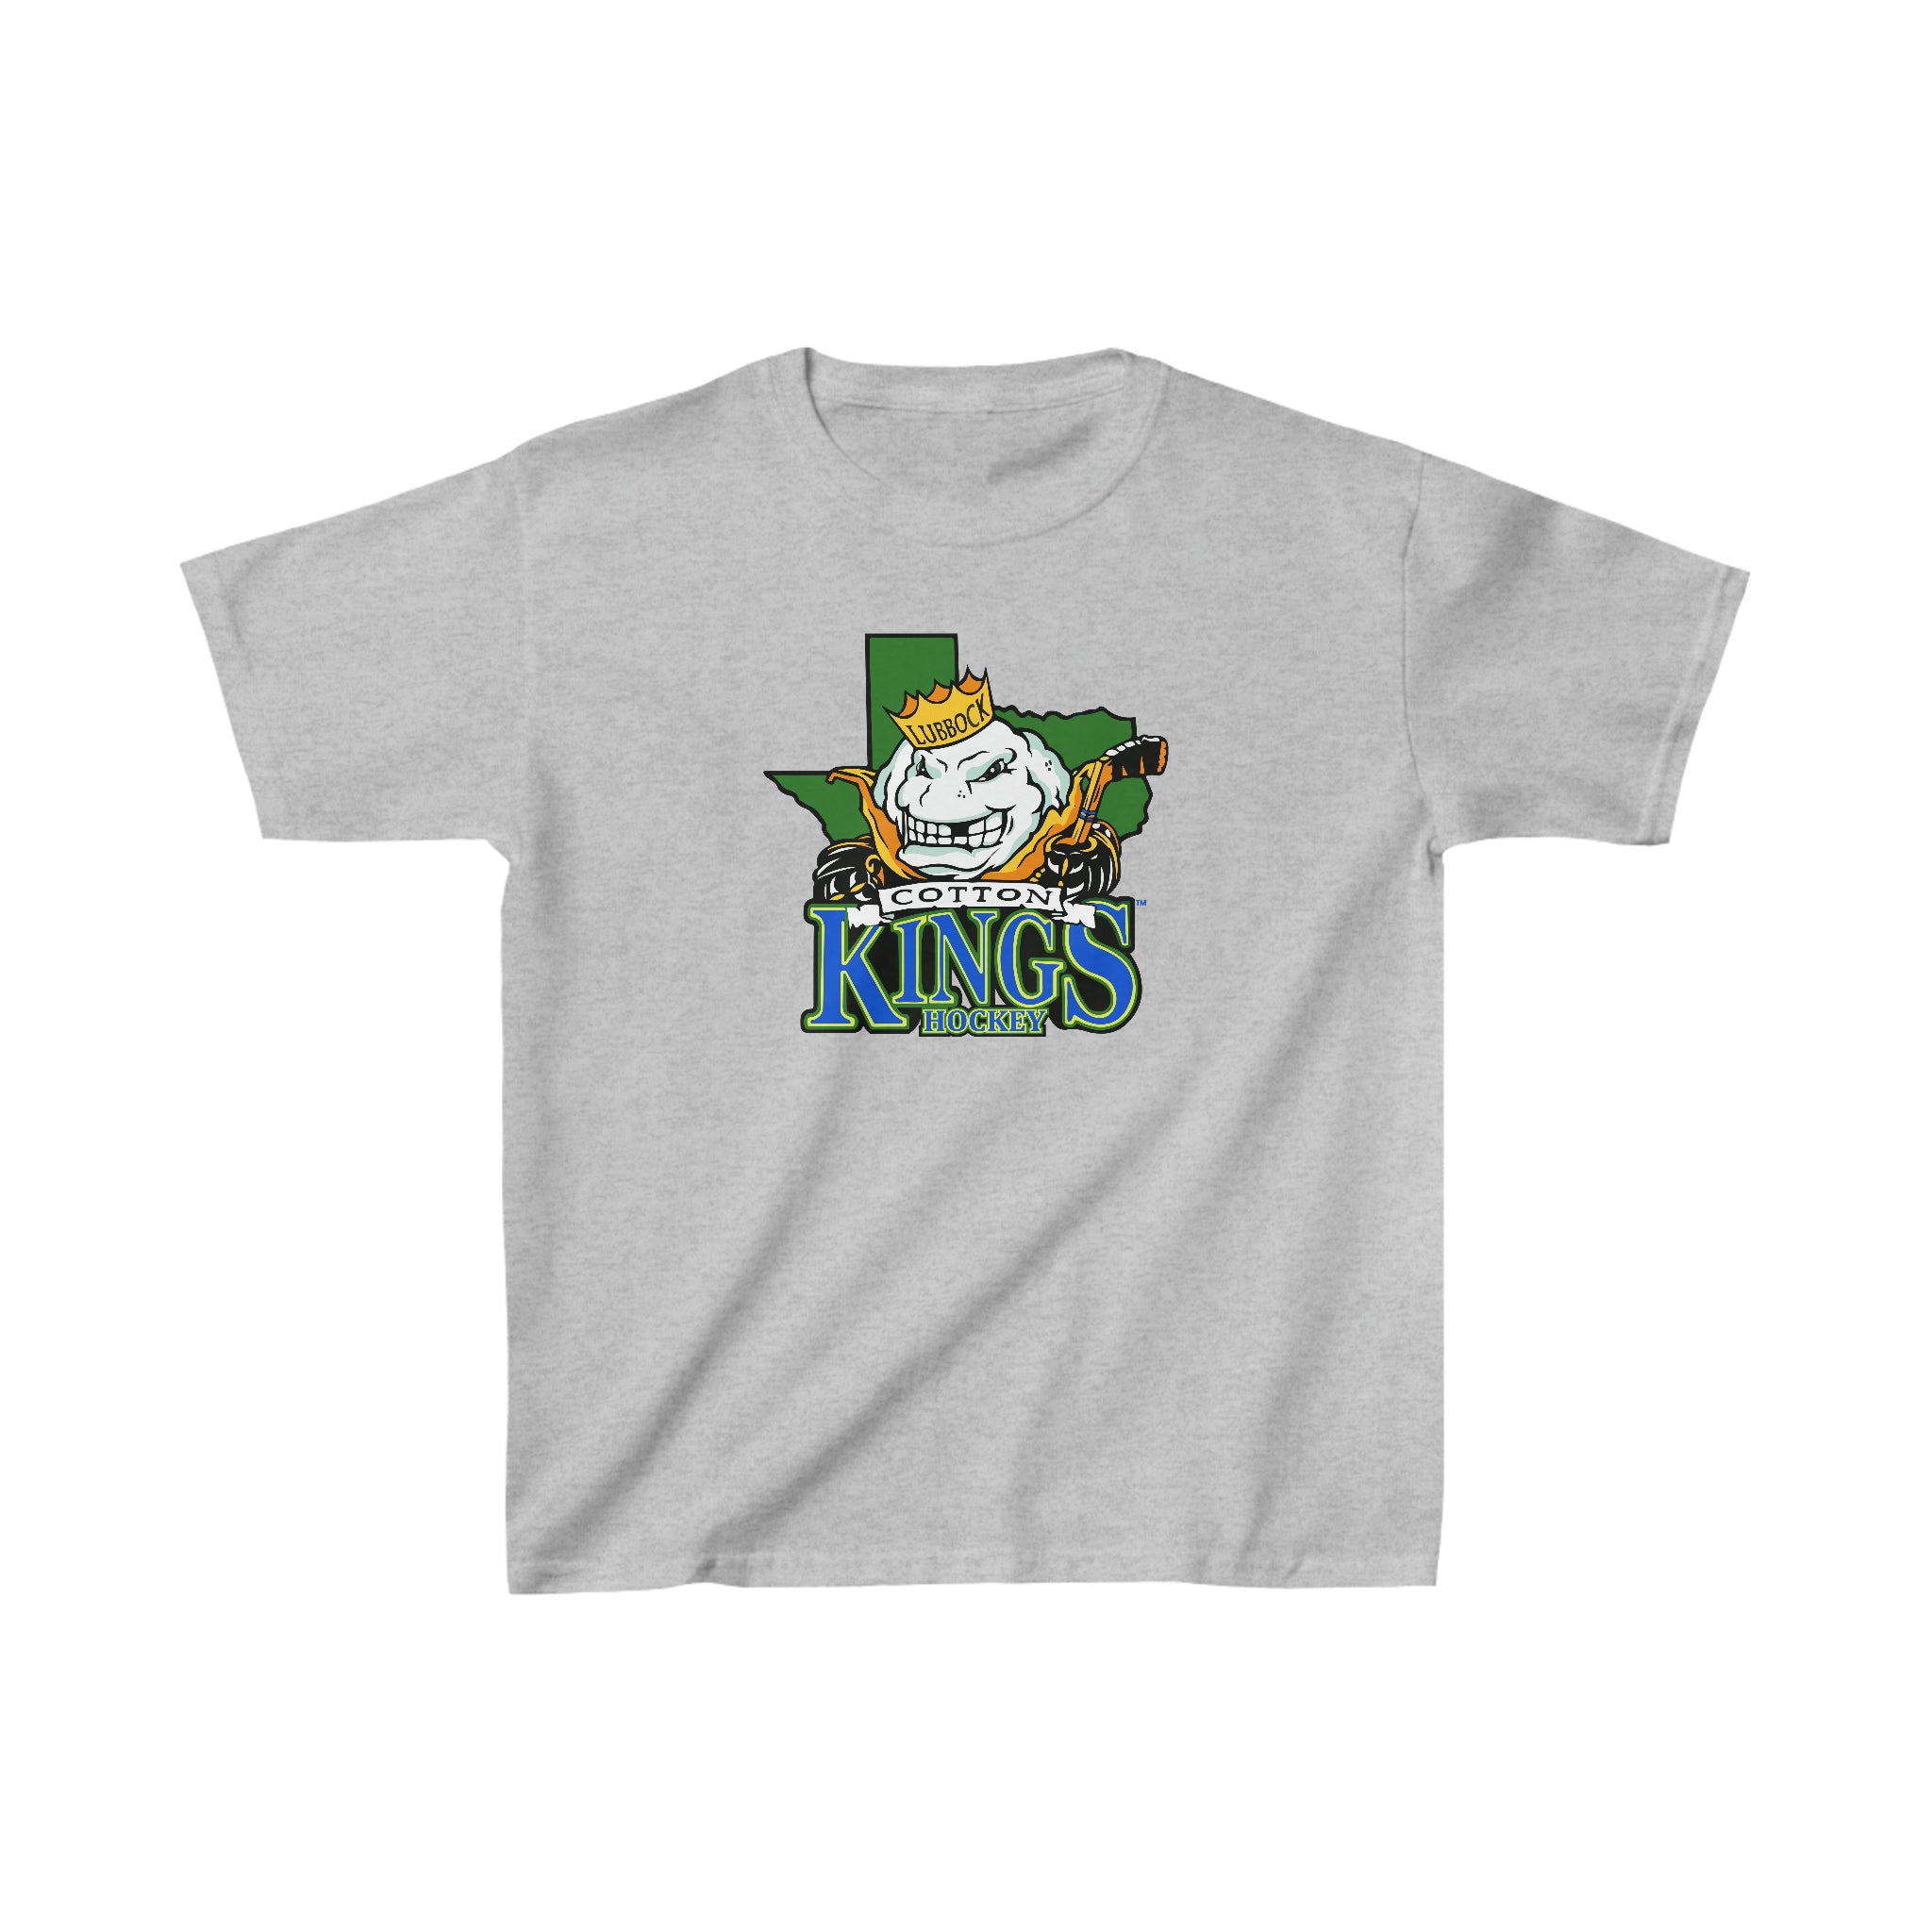 Lubbock Cotton Kings T-Shirt (Youth)